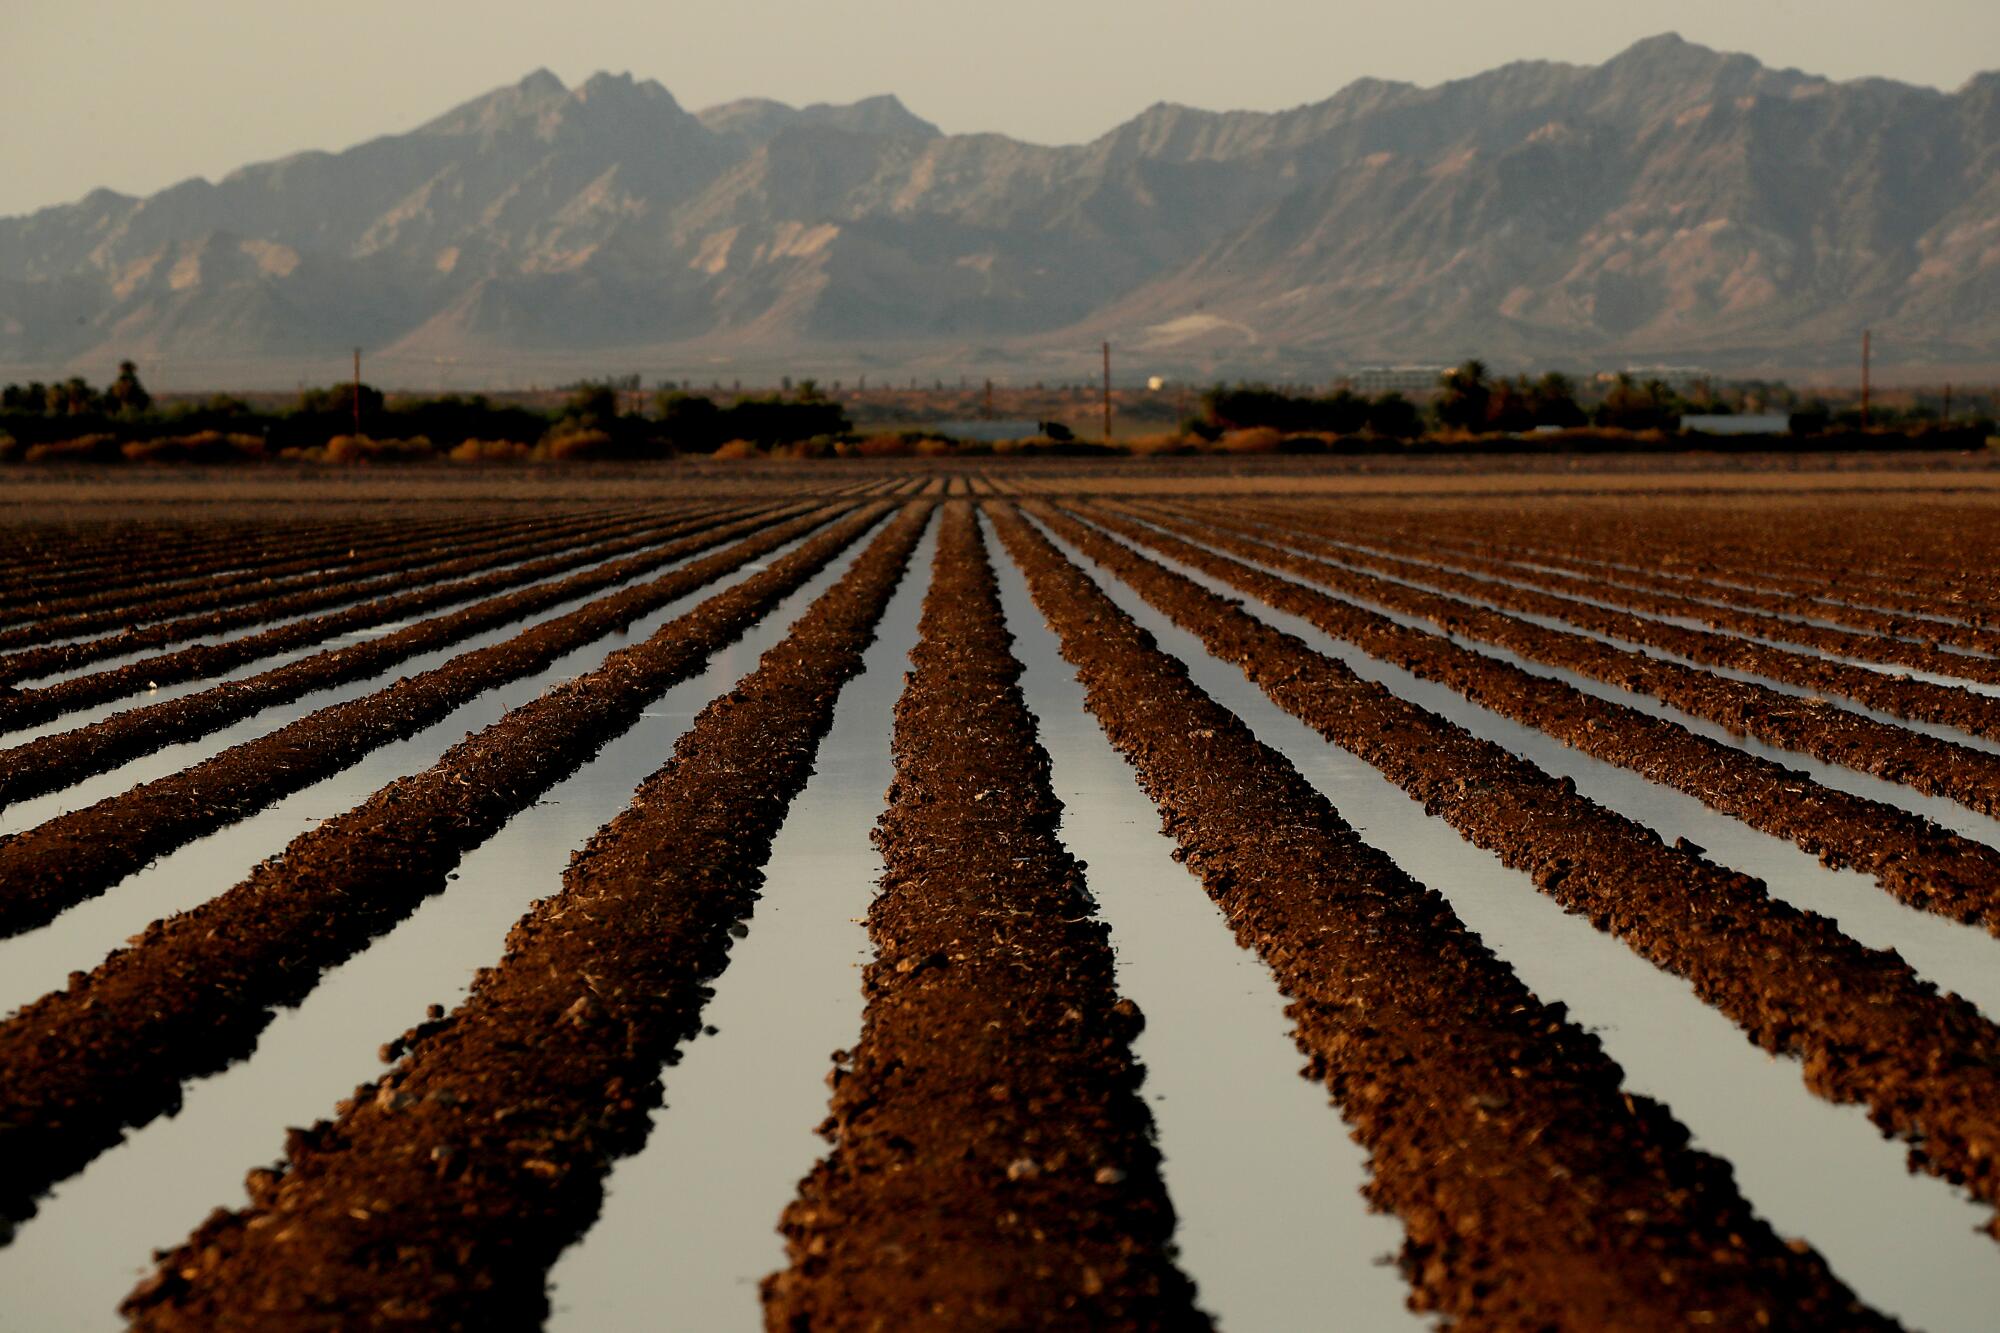 Water fills the furrows of a farm field as mountains rise in the background.